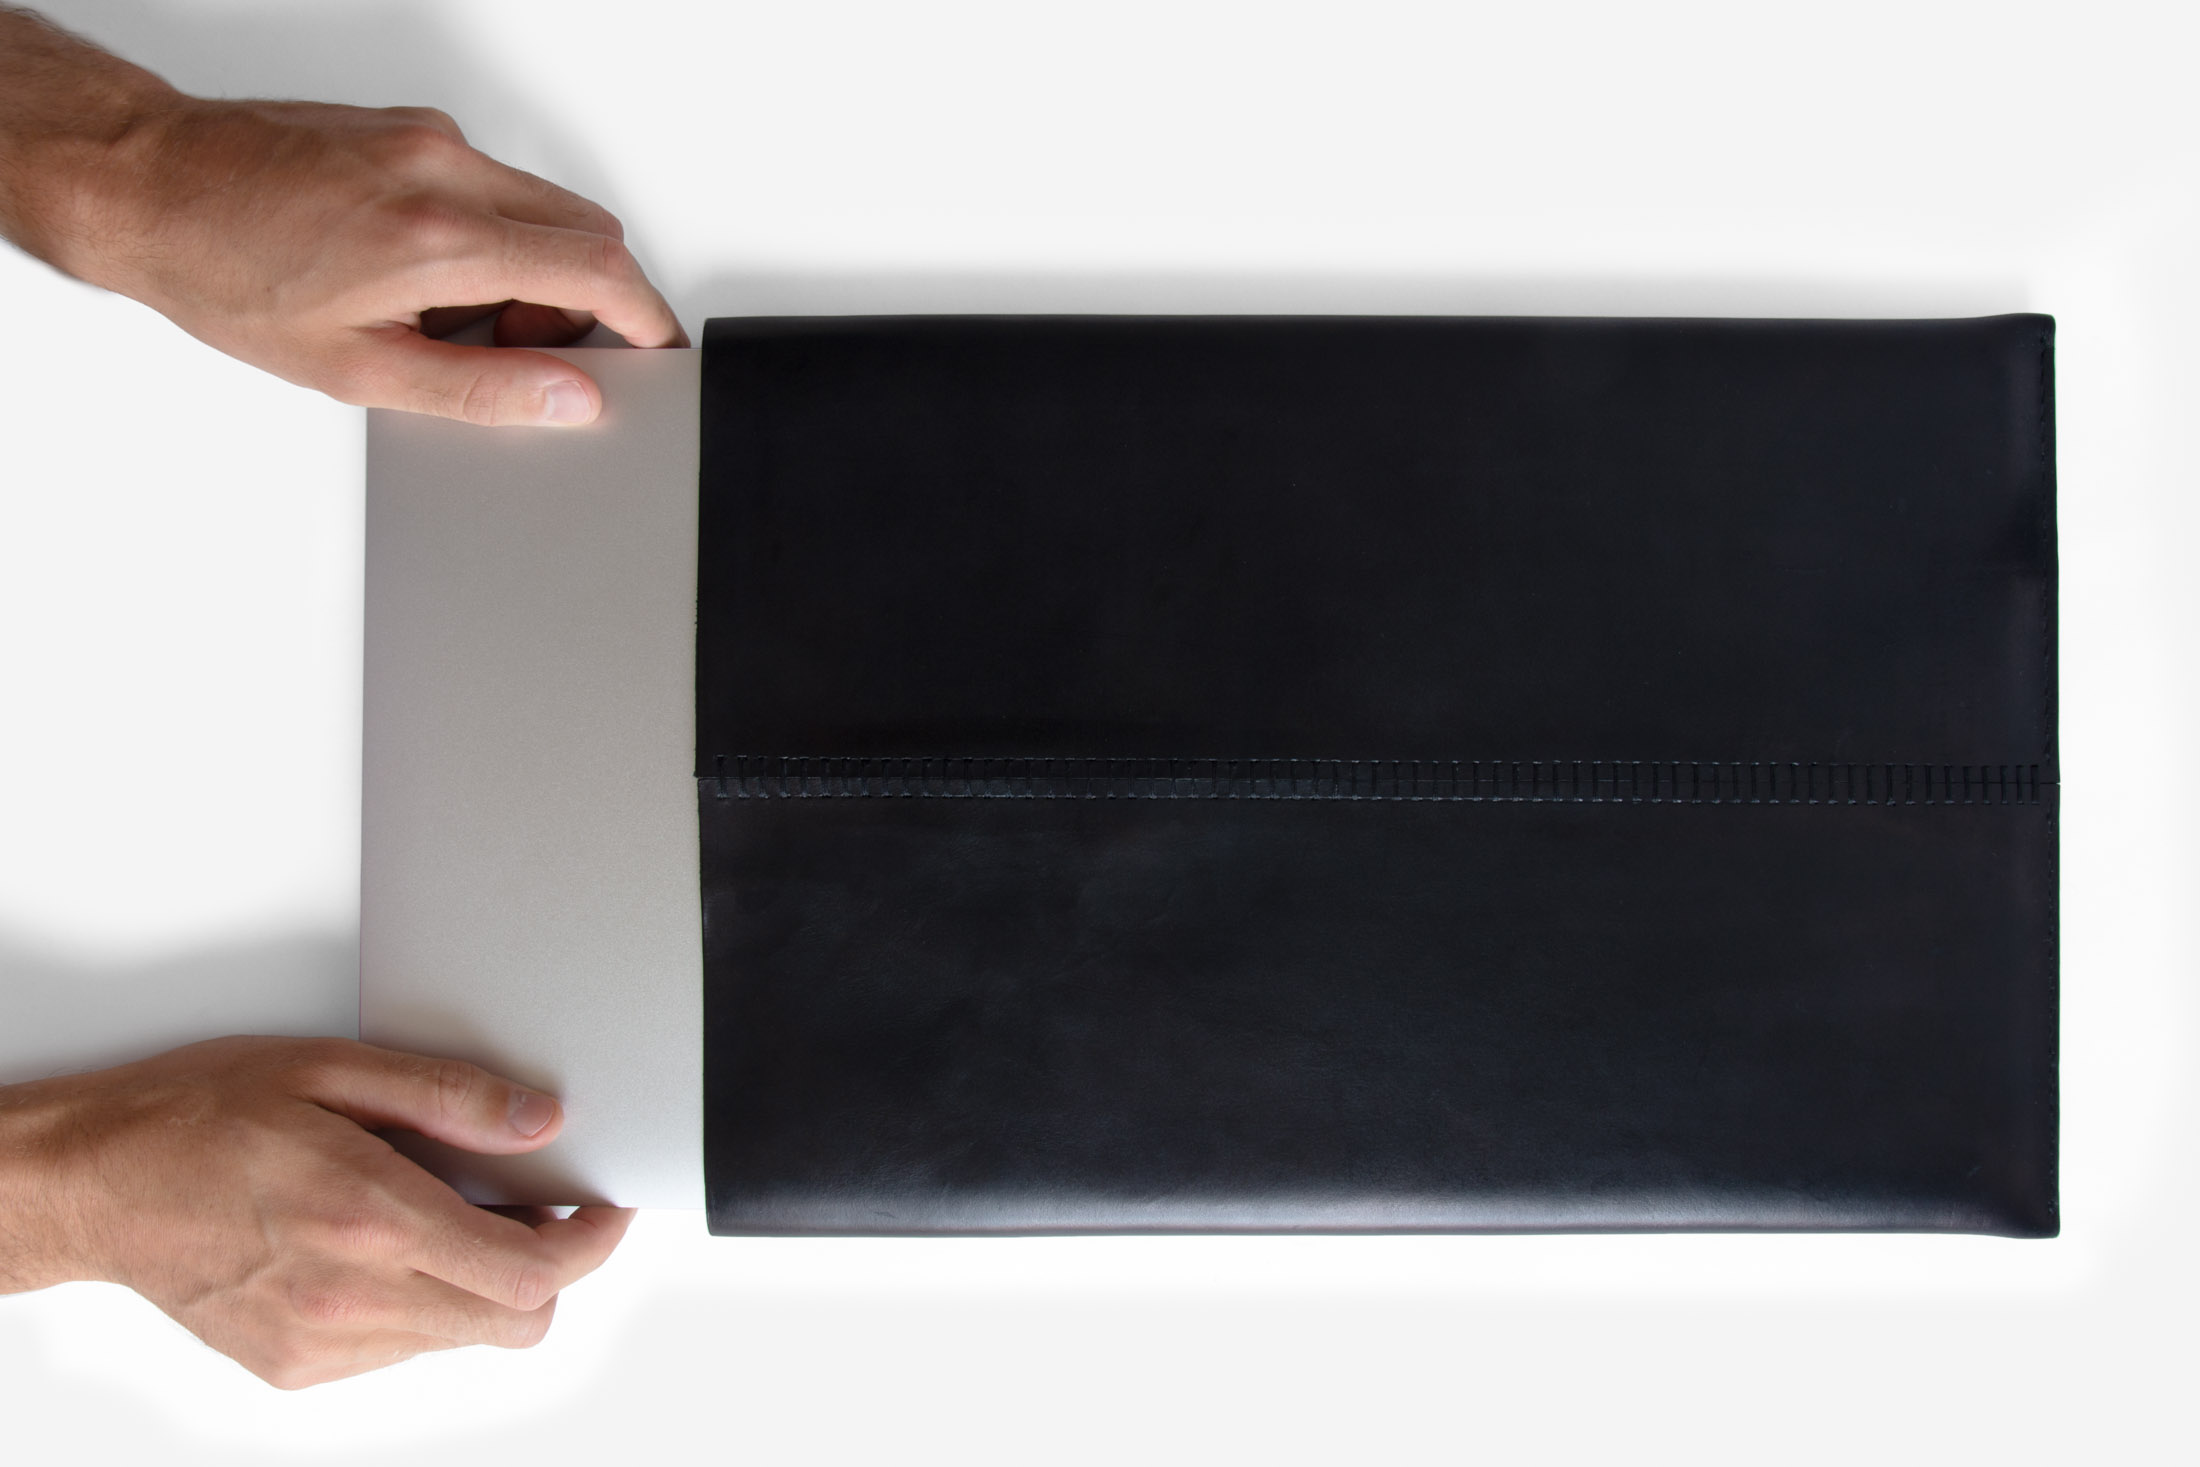 200729-Leather-Laptop-Case-Black-Top-View-With-Hands-rA